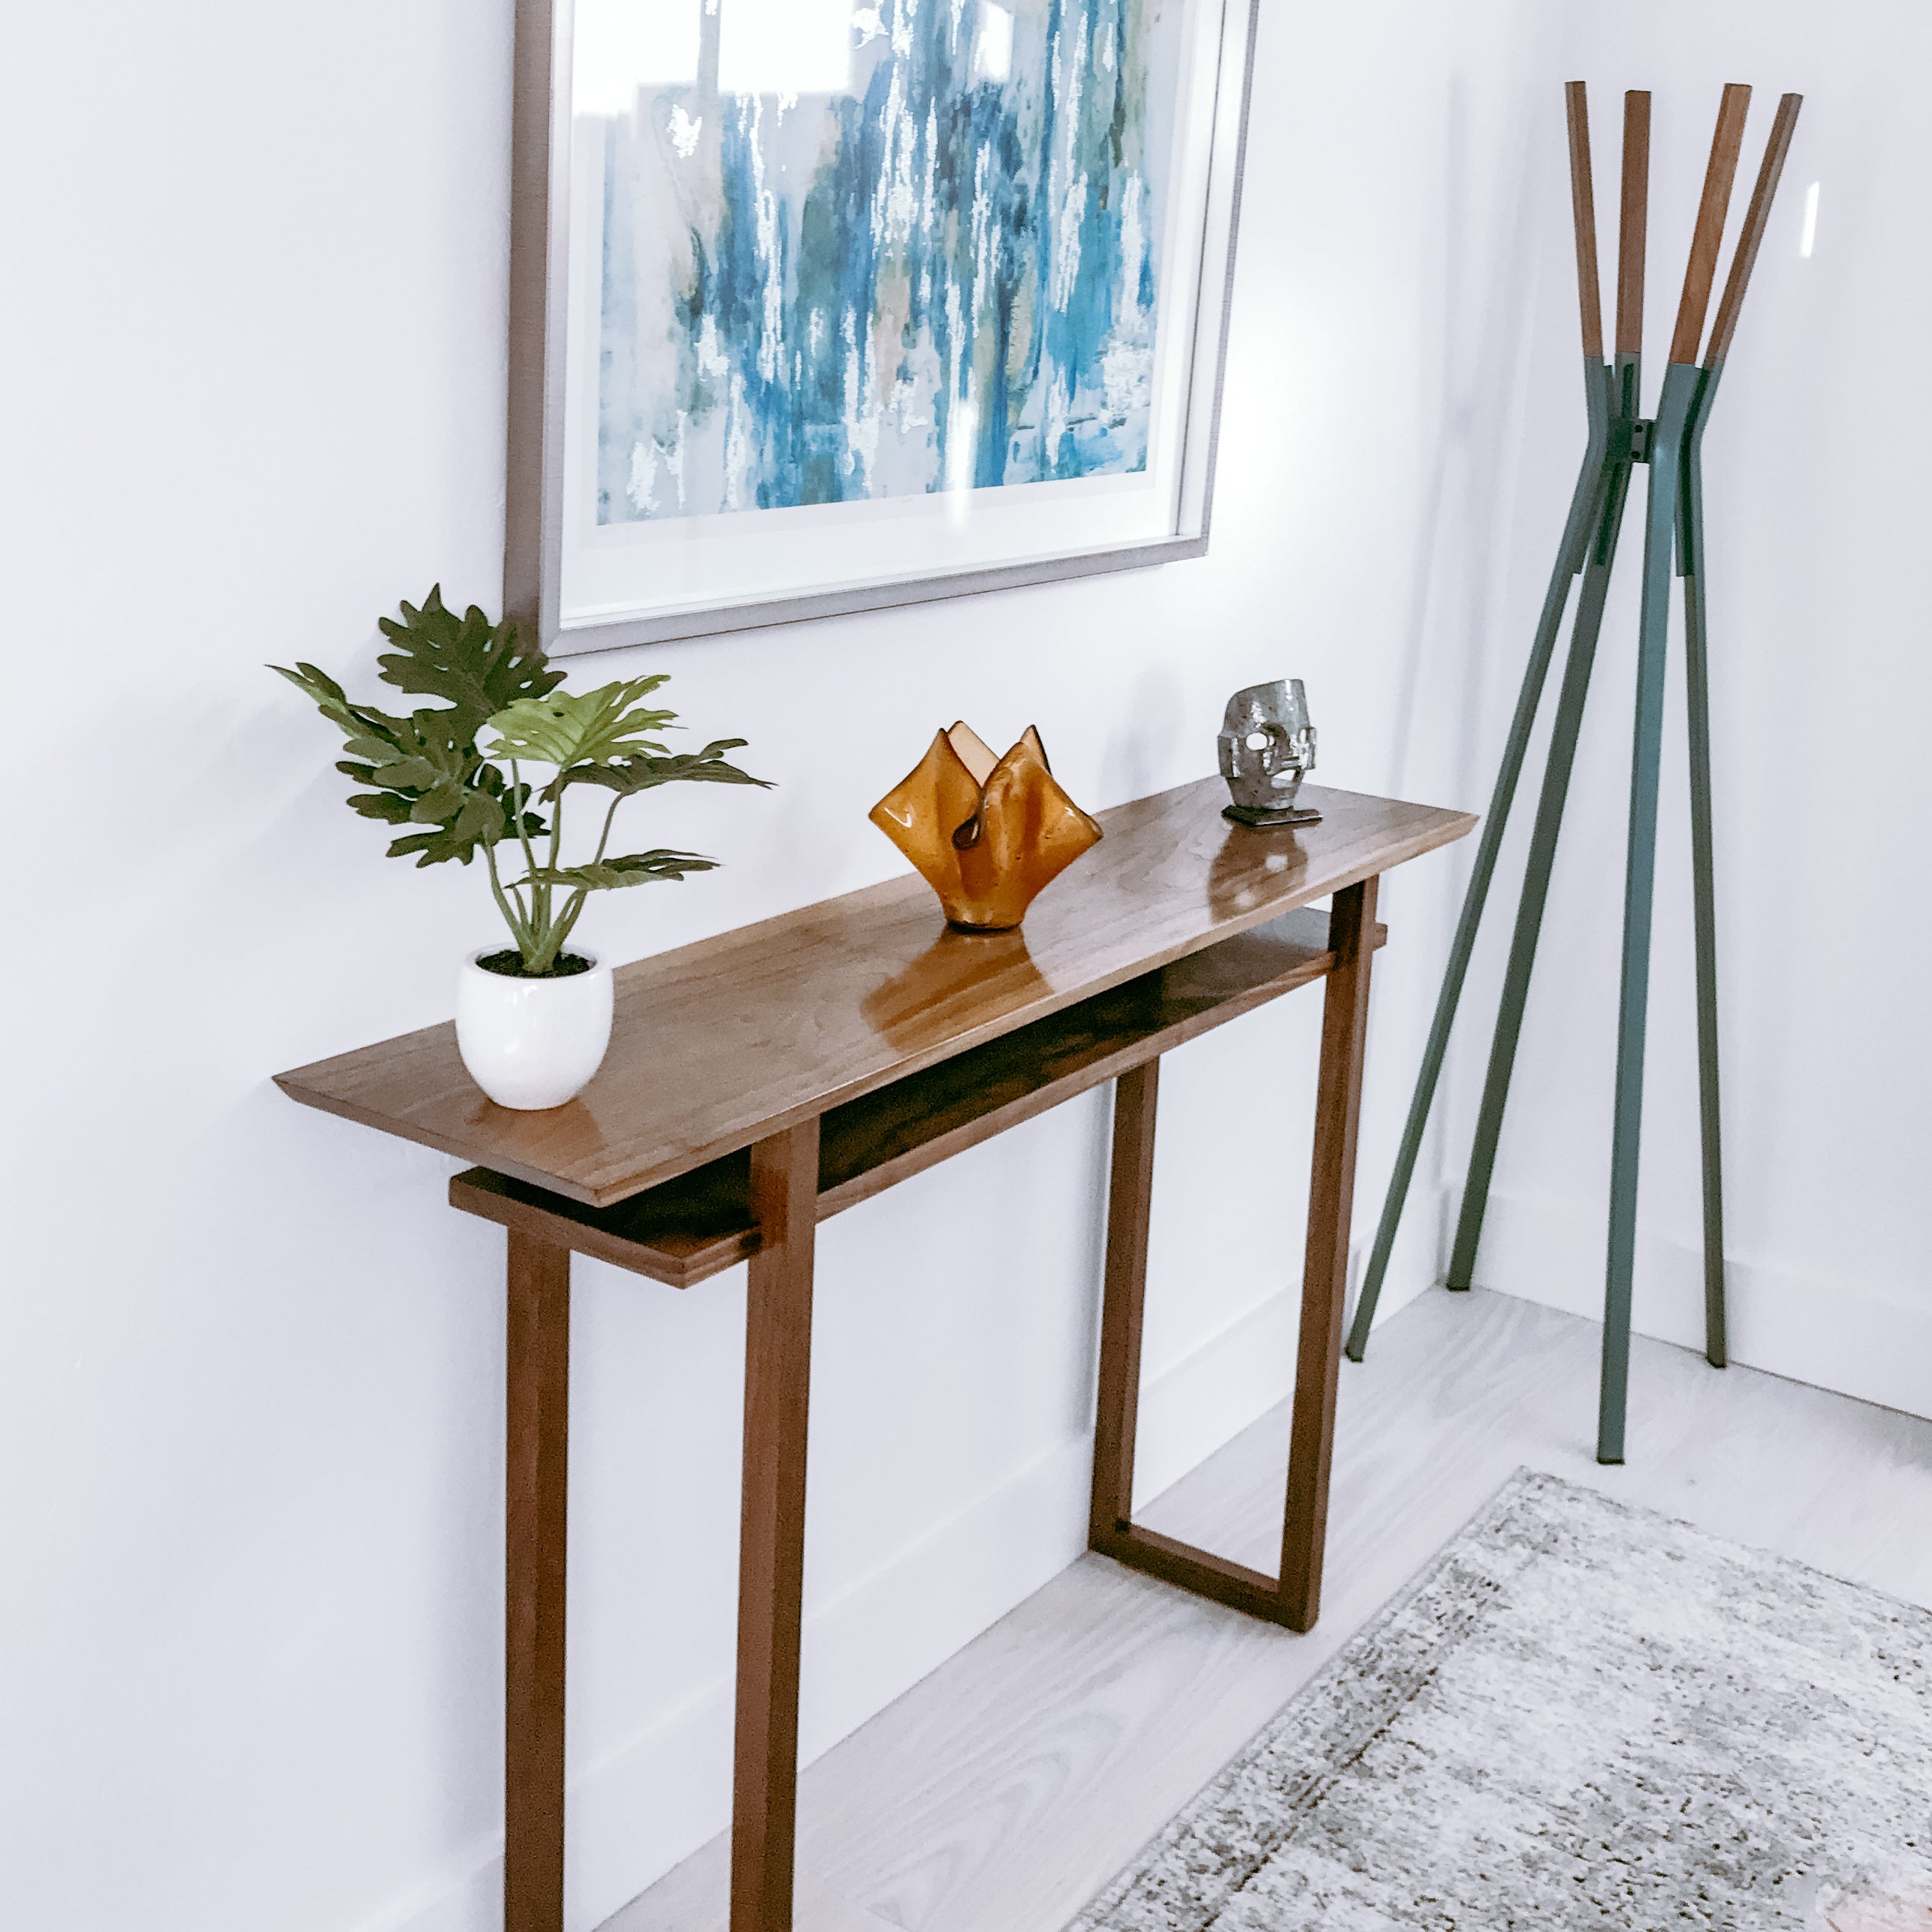 A narrow walnut console table with shelf in a modern entryway.  This modern console table is perfect for entryway decor or as a hallway table since it is a narrow console table and doesn't take up too much space